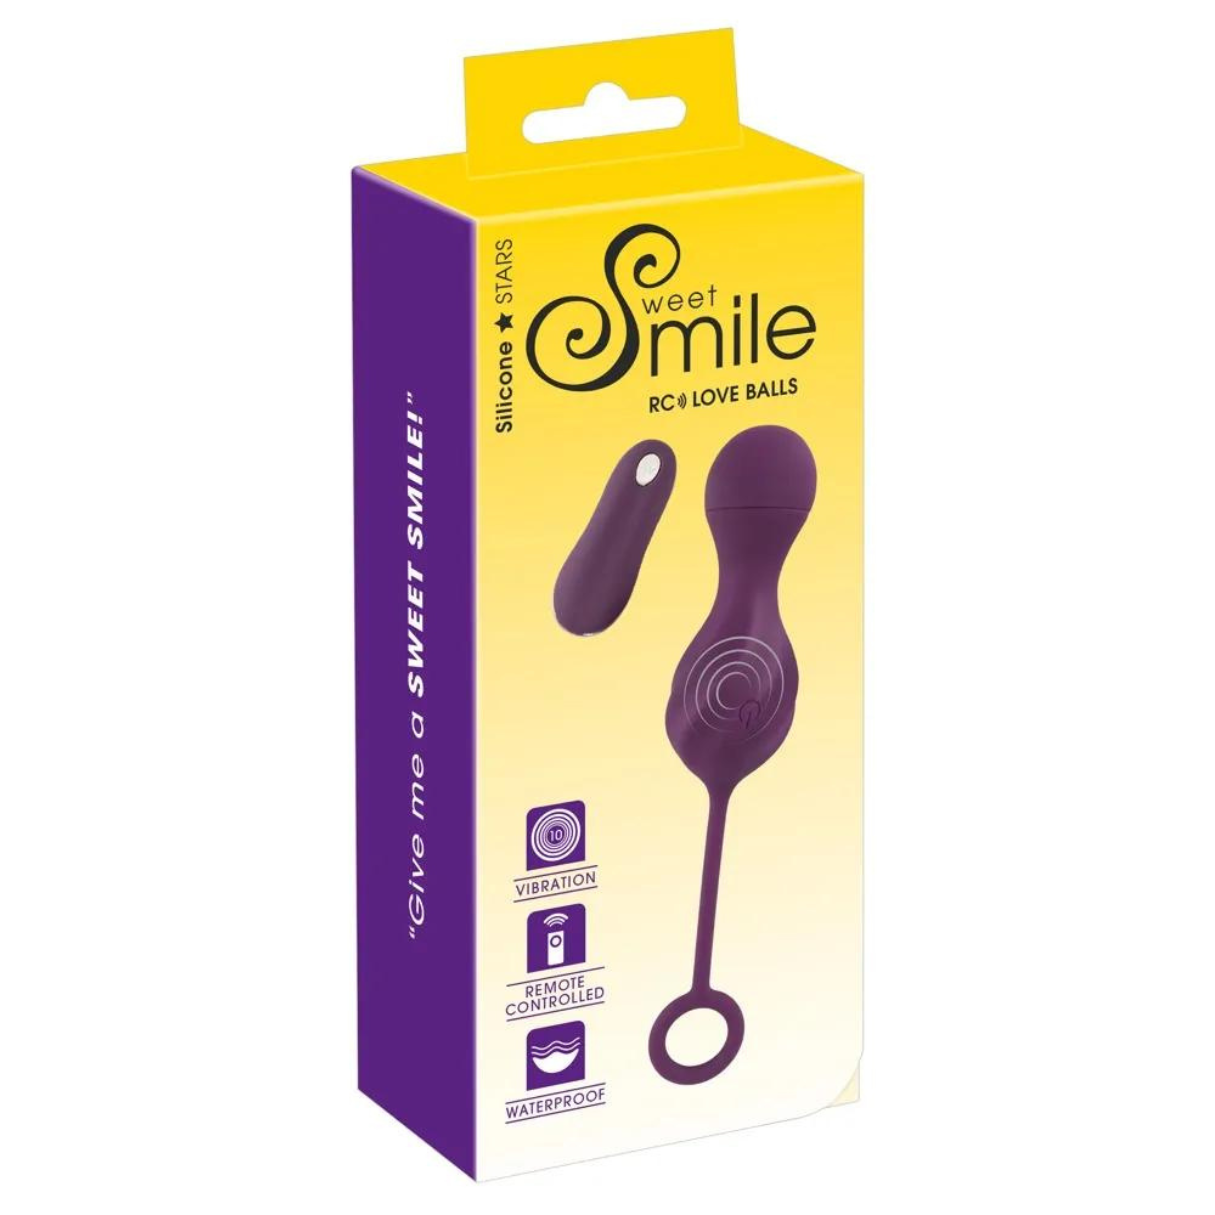 SWEET SMILE Remote Vibrator Balls Love Controlled